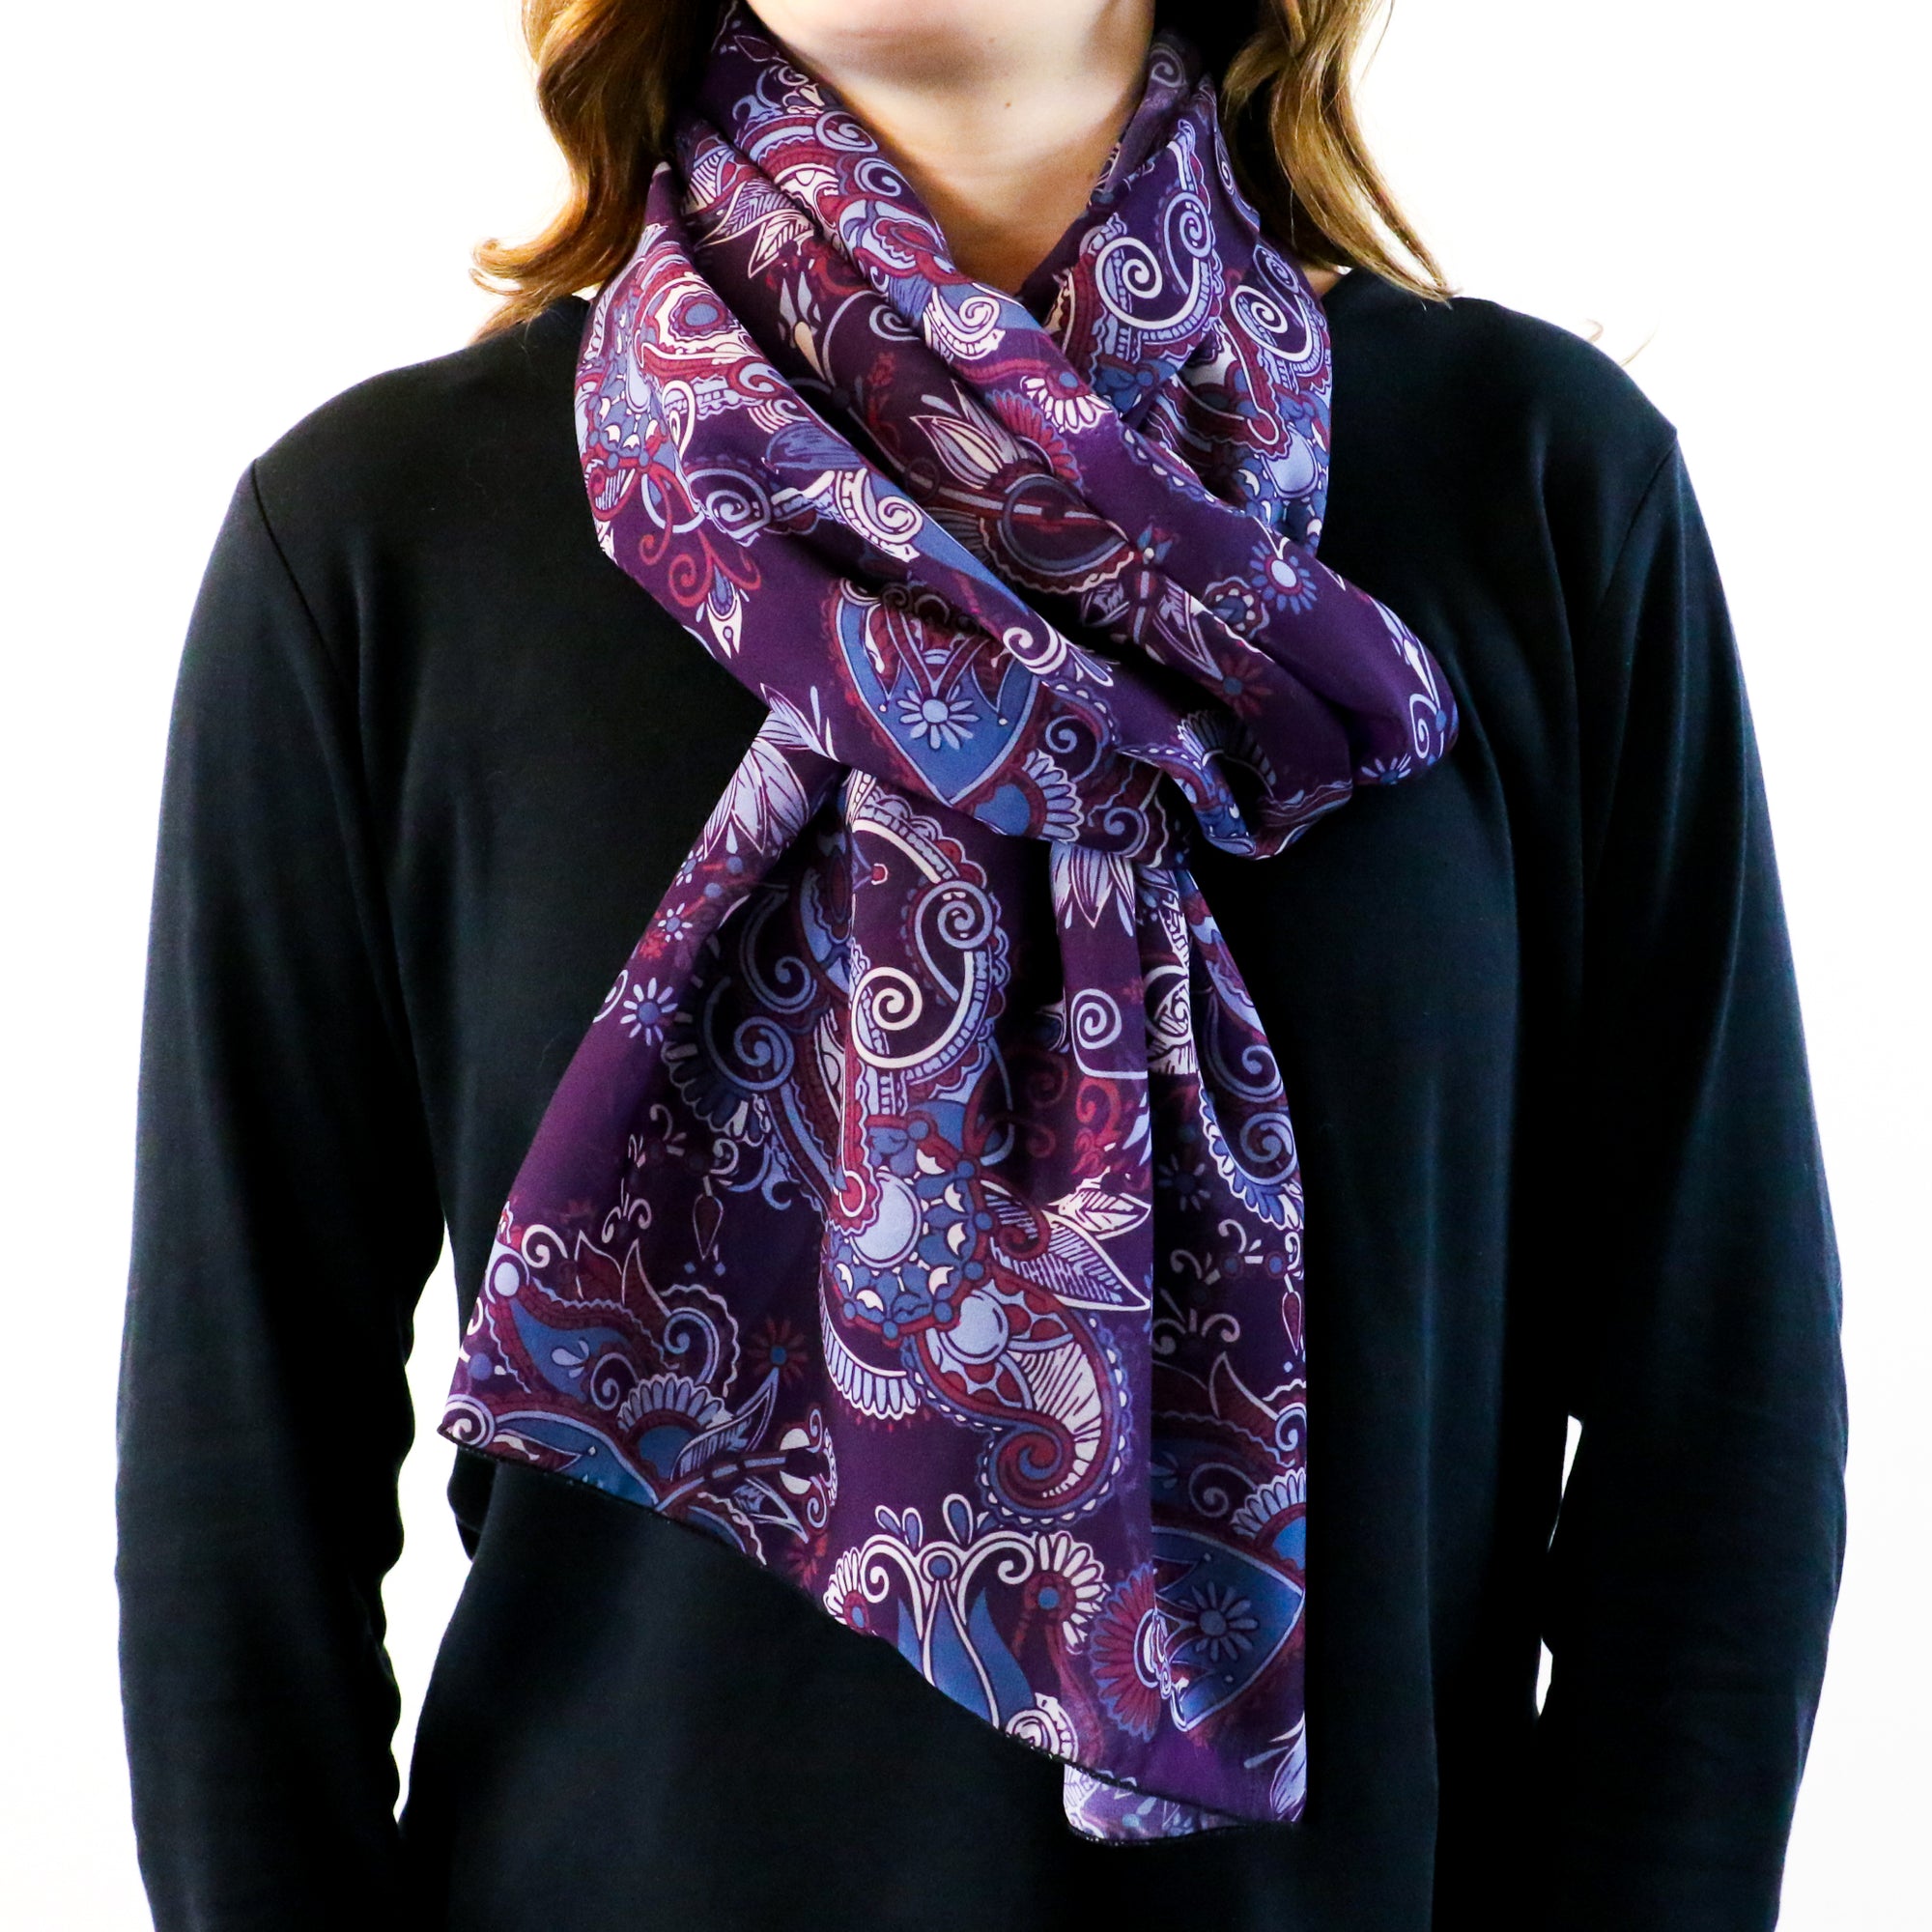 Knotty Tie Co. Butterfly Floral Paisley Hair Scarf